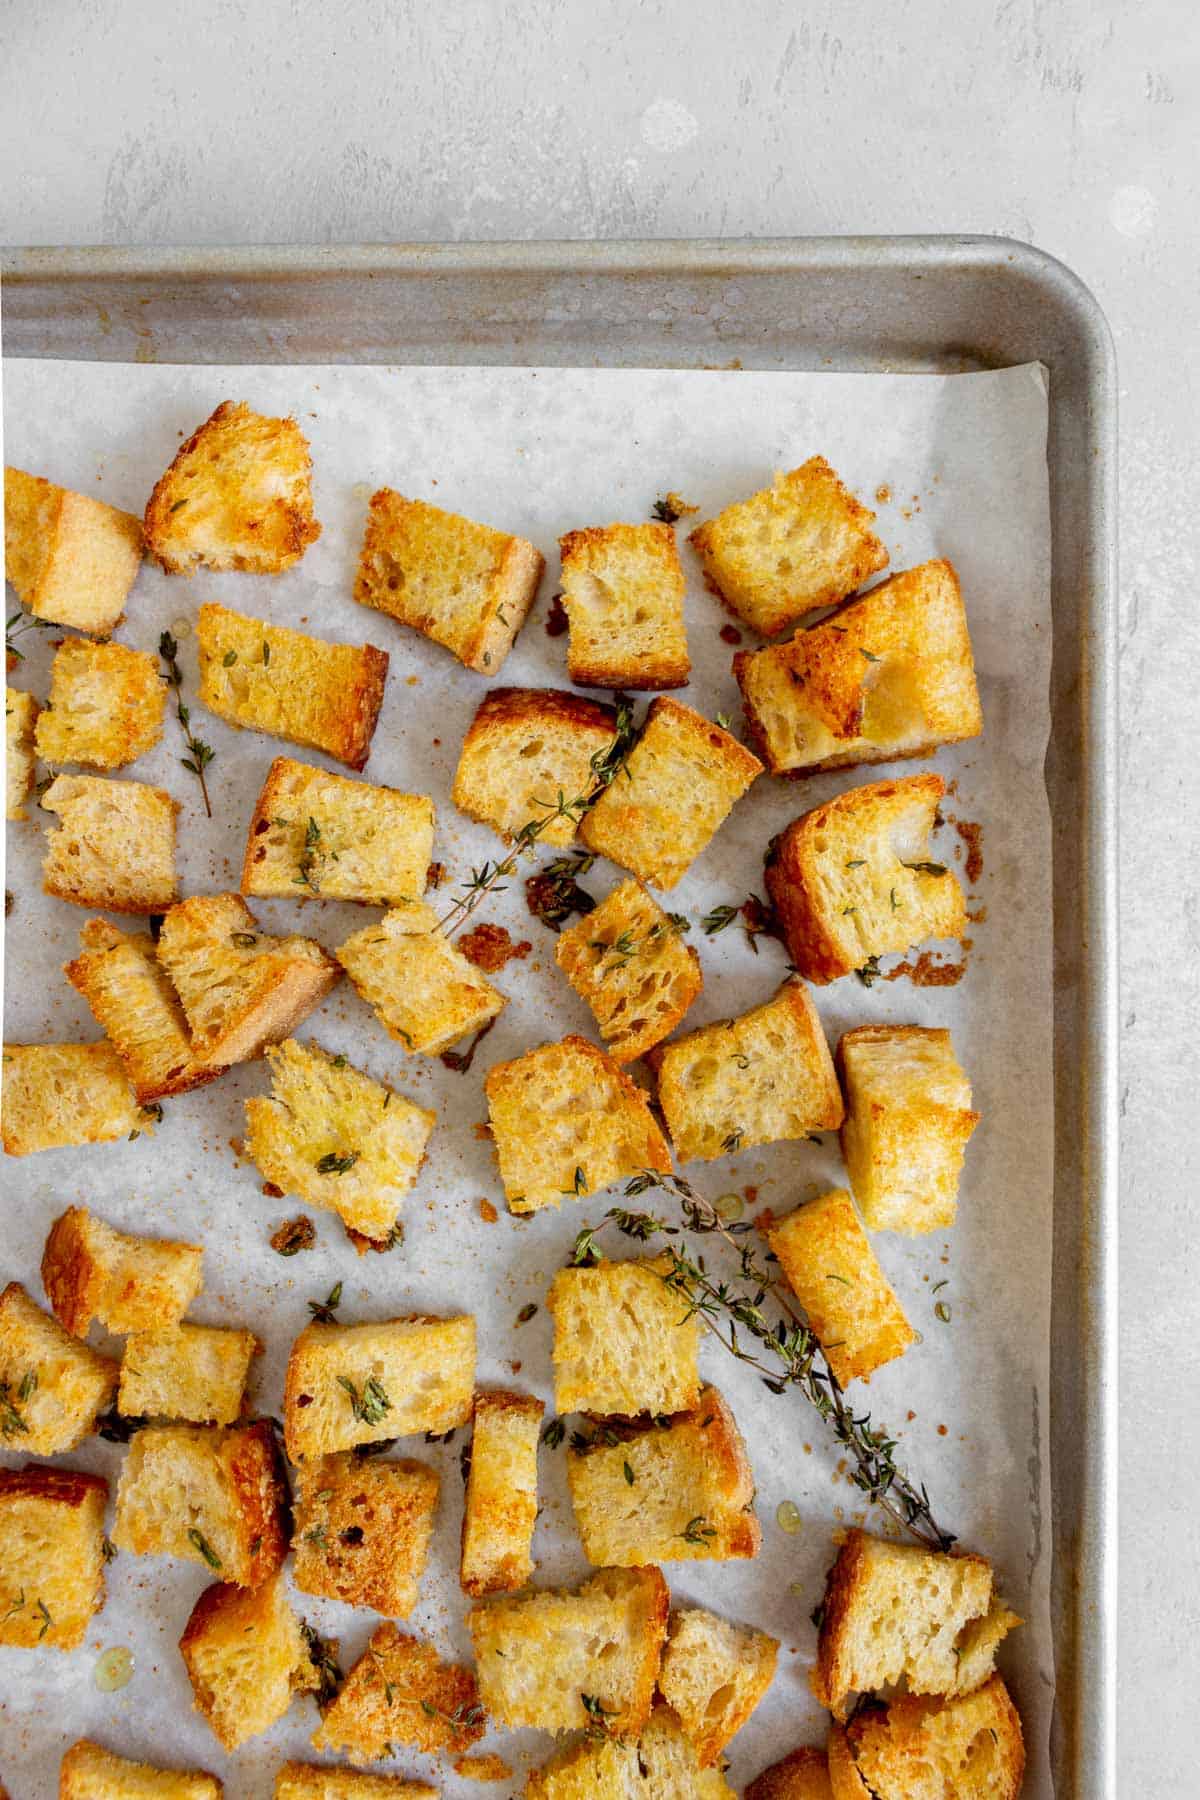 Overhead view of sourdough croutons on a sheet pan.